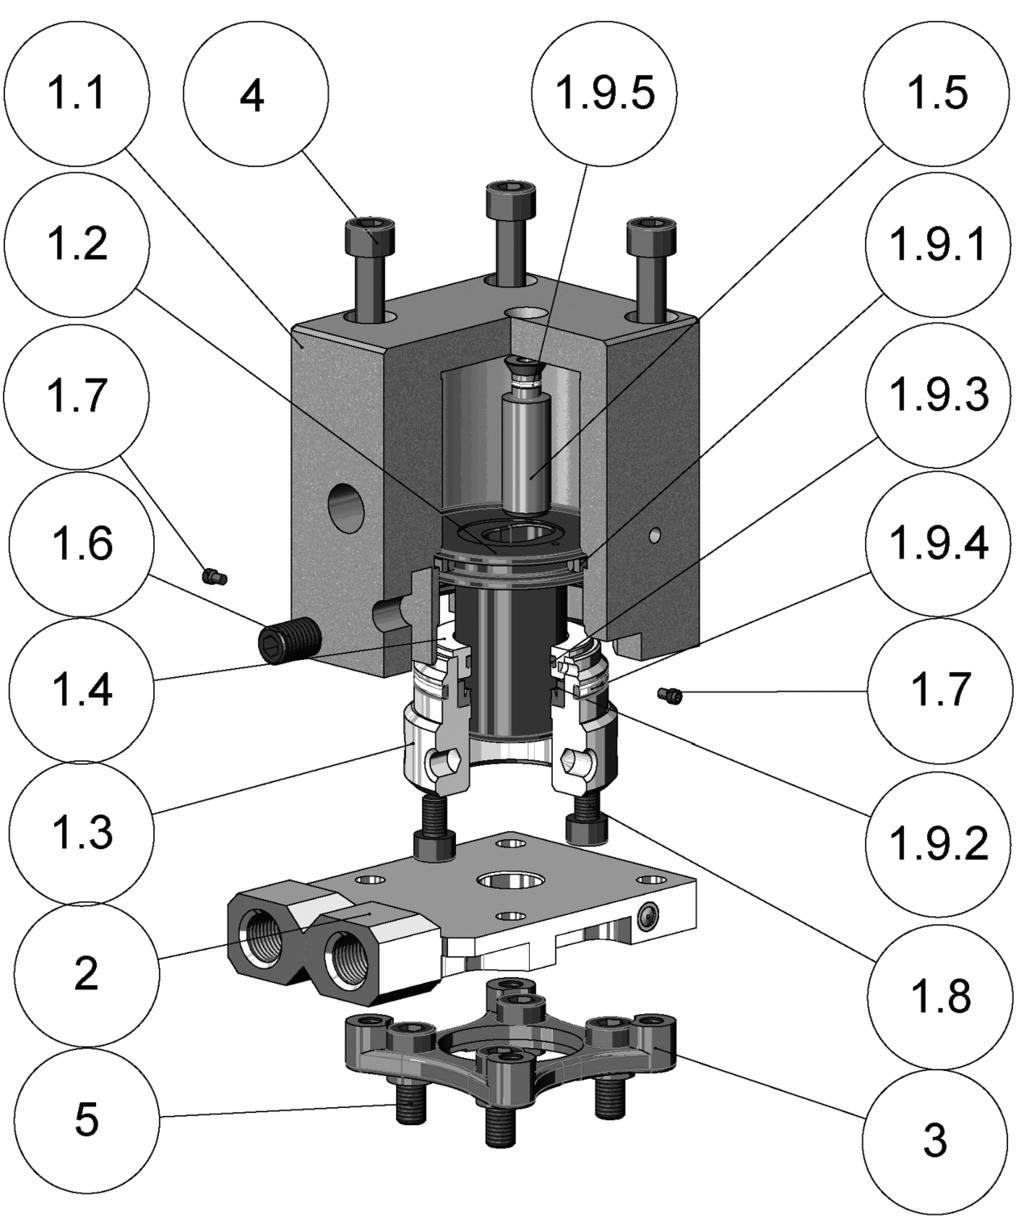 8.2.2 Exploded View HY4018M Series HY4018M03 Series - his actuator is especially for the option Synool 1 or 2 and/or the option with hermocouple. HY4018M04 Series - his actuator is the usual actuator.